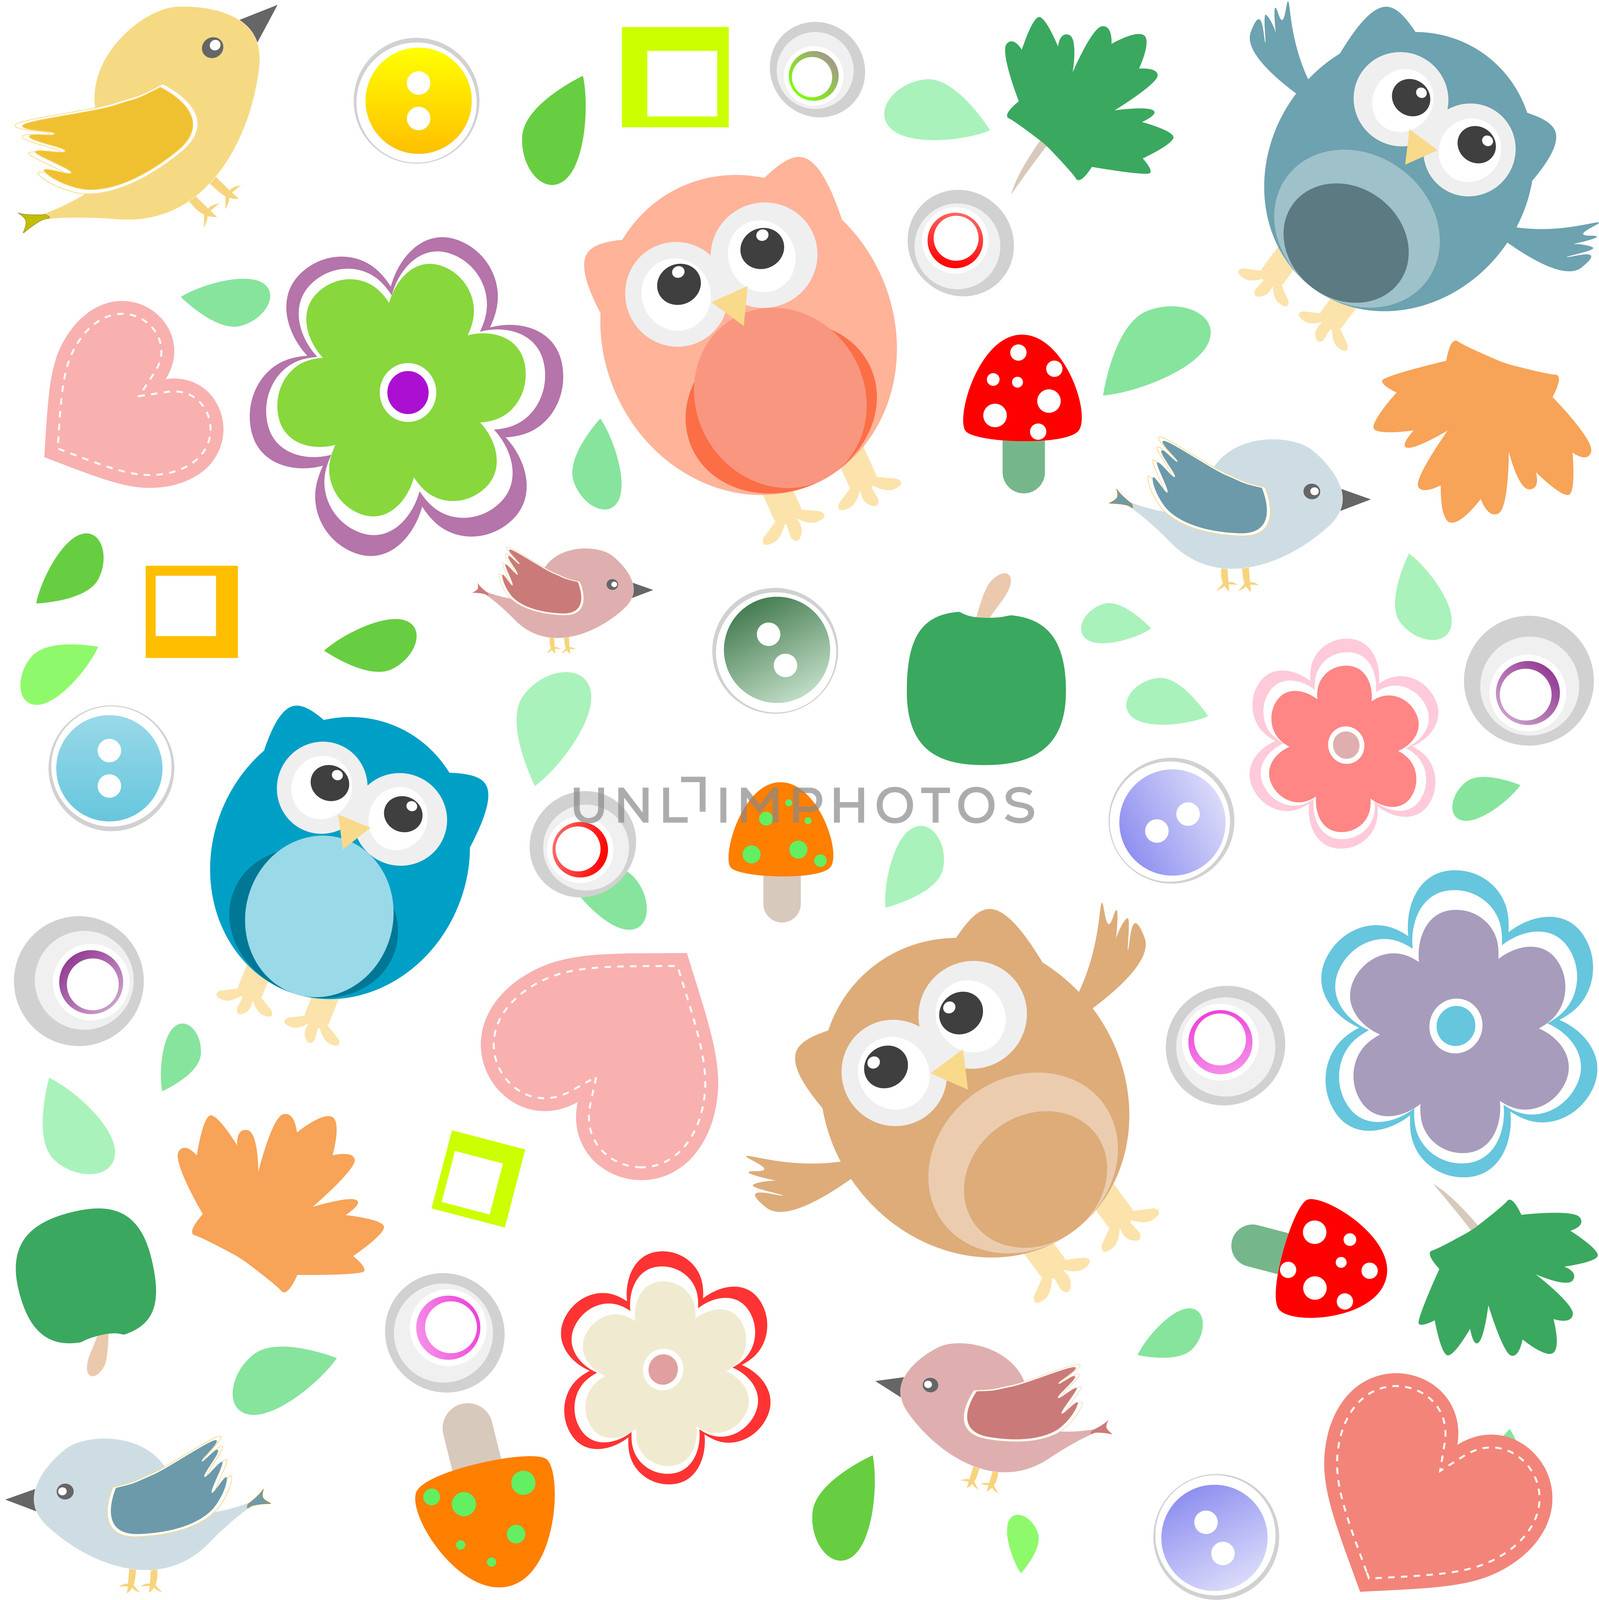 Seamless background with owls, leafs, mushrooms and flowers by fotoscool